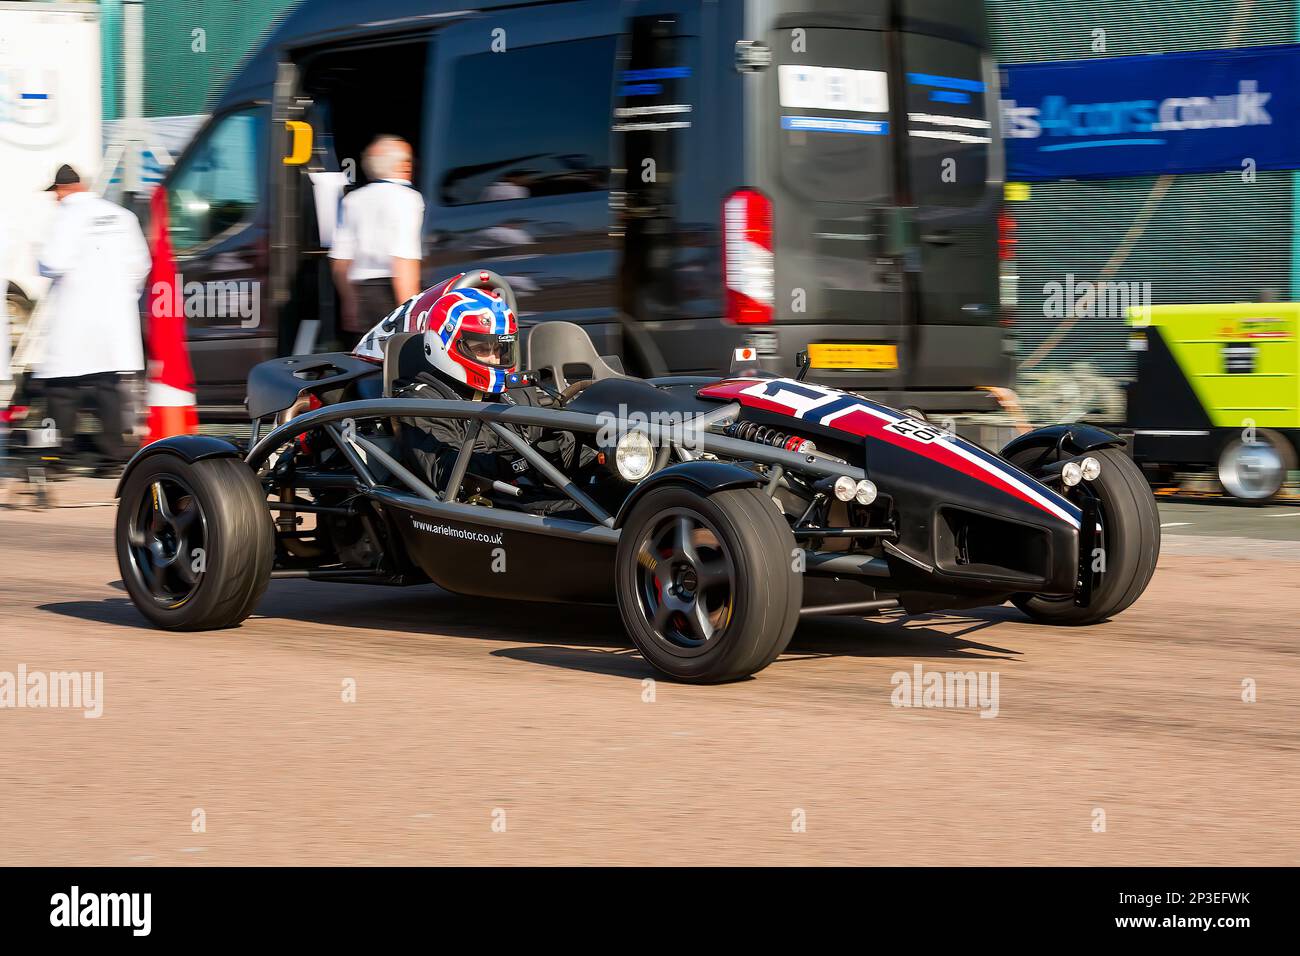 Ariel Atom at The Brighton National Speed Trials 2018. This is the oldest motor racing event in the UK and is held in the south east coastal town of Brighton. Madeira drive is a road which runs along the seafront and is normal full of people explorer the beach, pier and local attractions. Today it is turned in to a 1/4 time trial course. 1st September 2018 Stock Photo